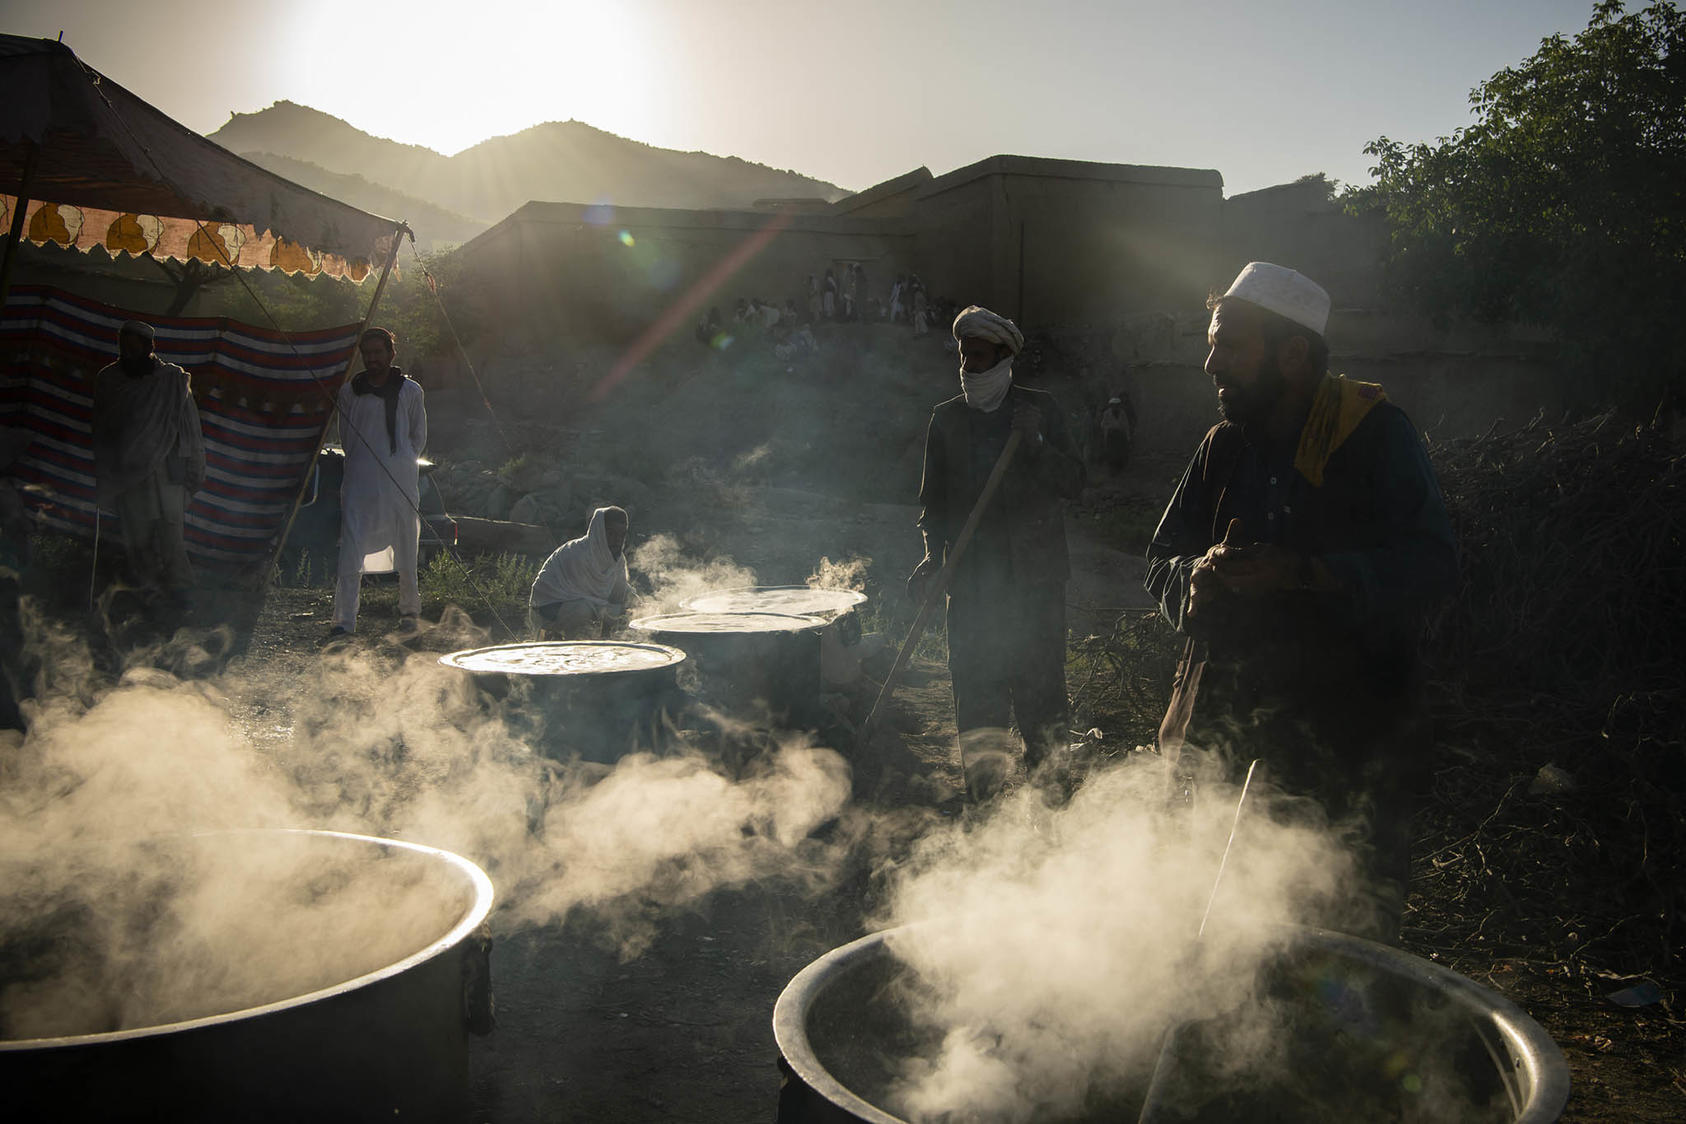 A local charity organization cooks vats of food to aid people affected by the earthquake, in the Gayan district of Afghanistan, June 24, 2022. (Kiana Hayeri/The New York Times)